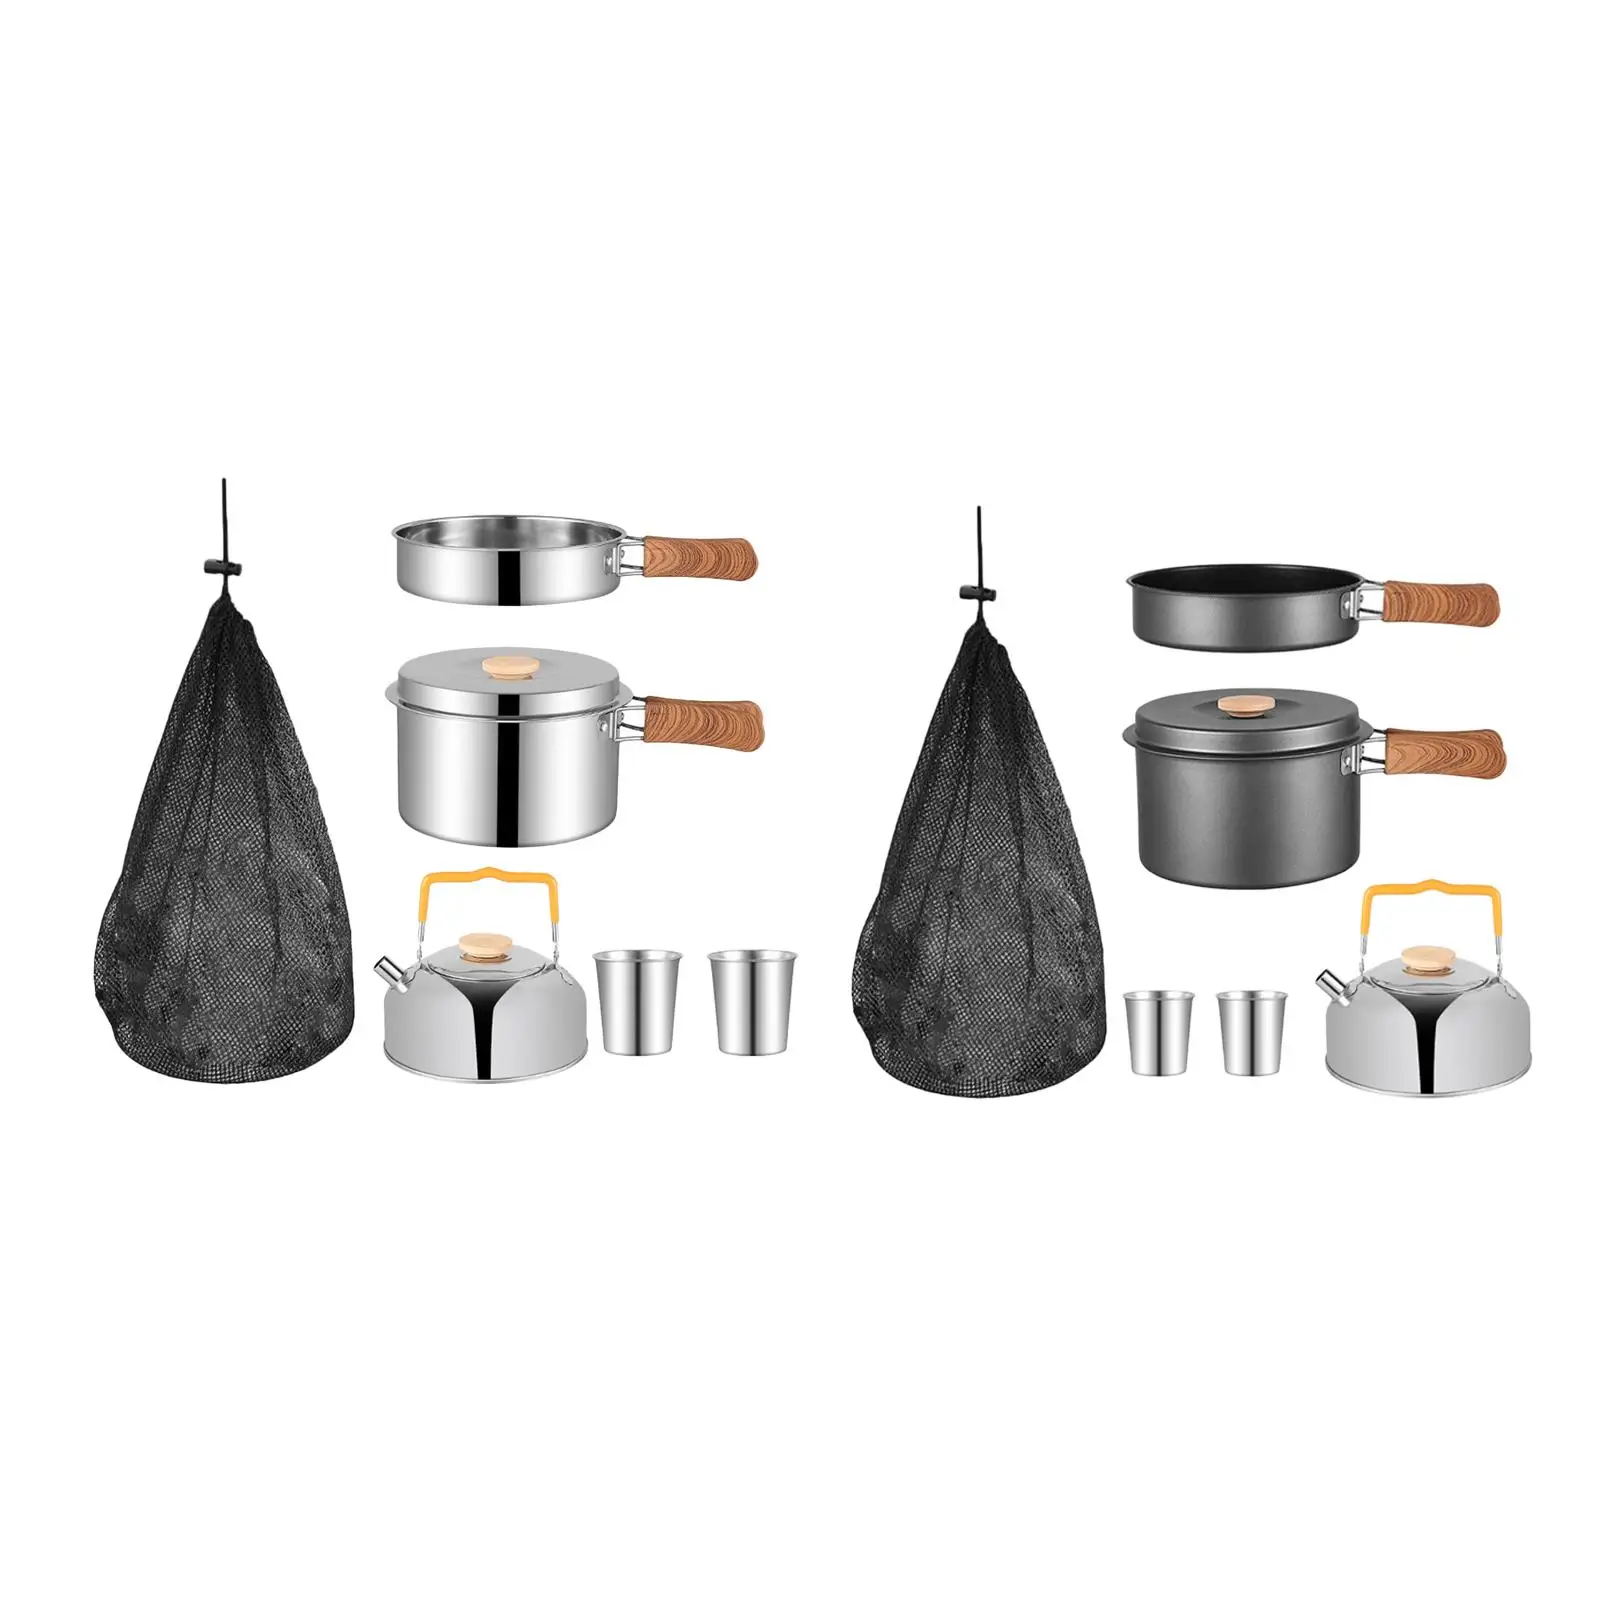 5 Pieces Camping Cookware Set Outdoor Cook Gear Kitchenware Folding Handle Camping Pot Pan and Kettle for Home Mountaineering